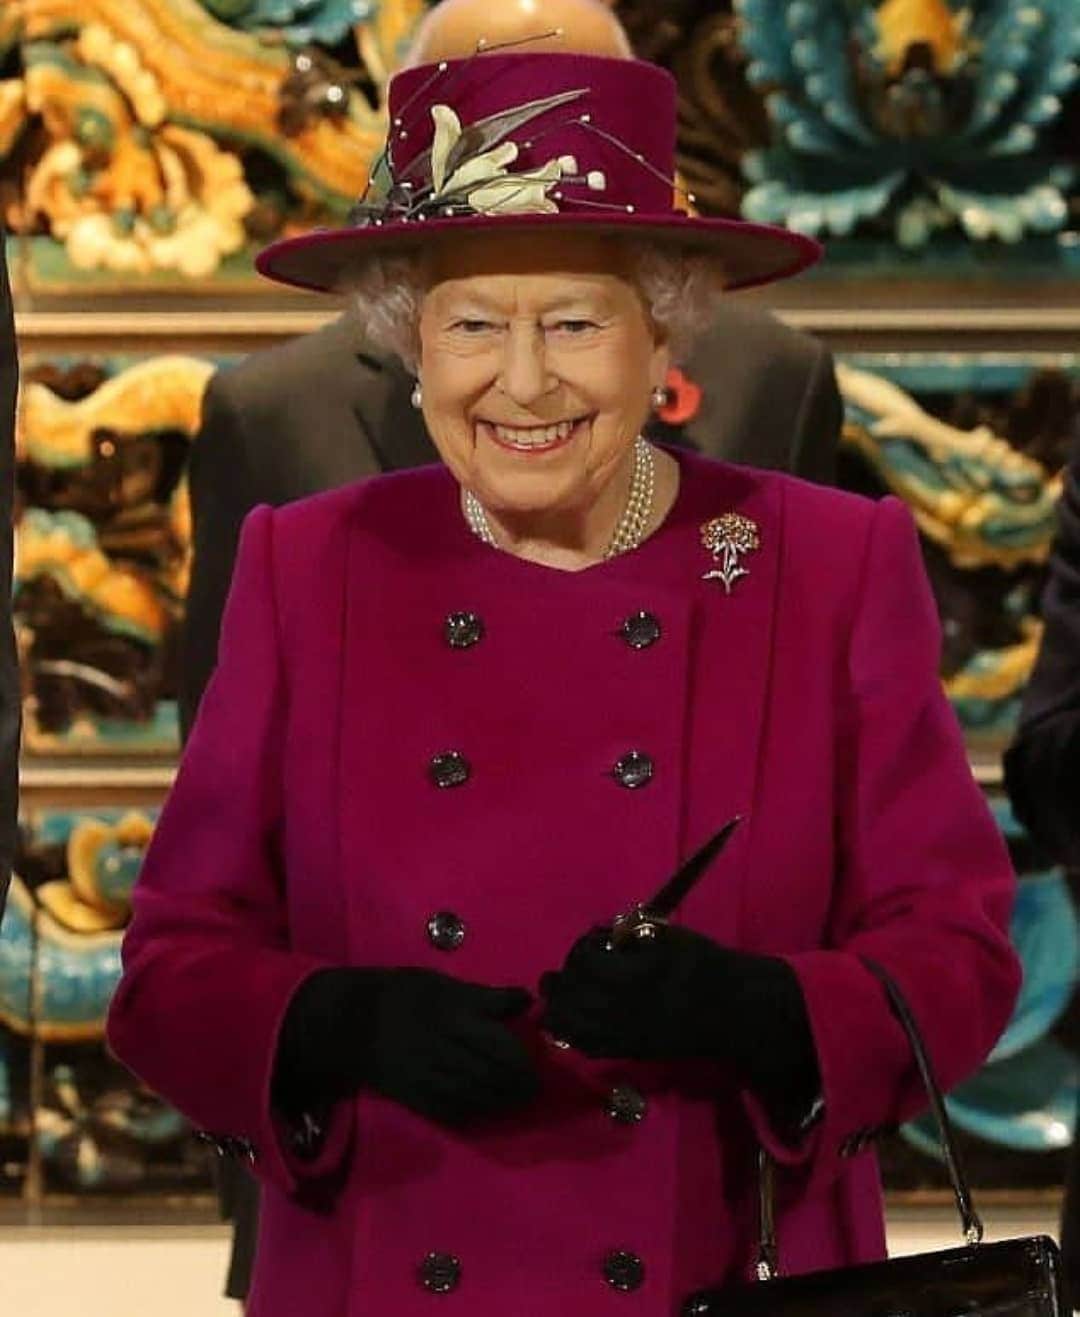 Queen Elizabeth II is under medical supervision at Balmoral in Scotland. Source: Getty Images.